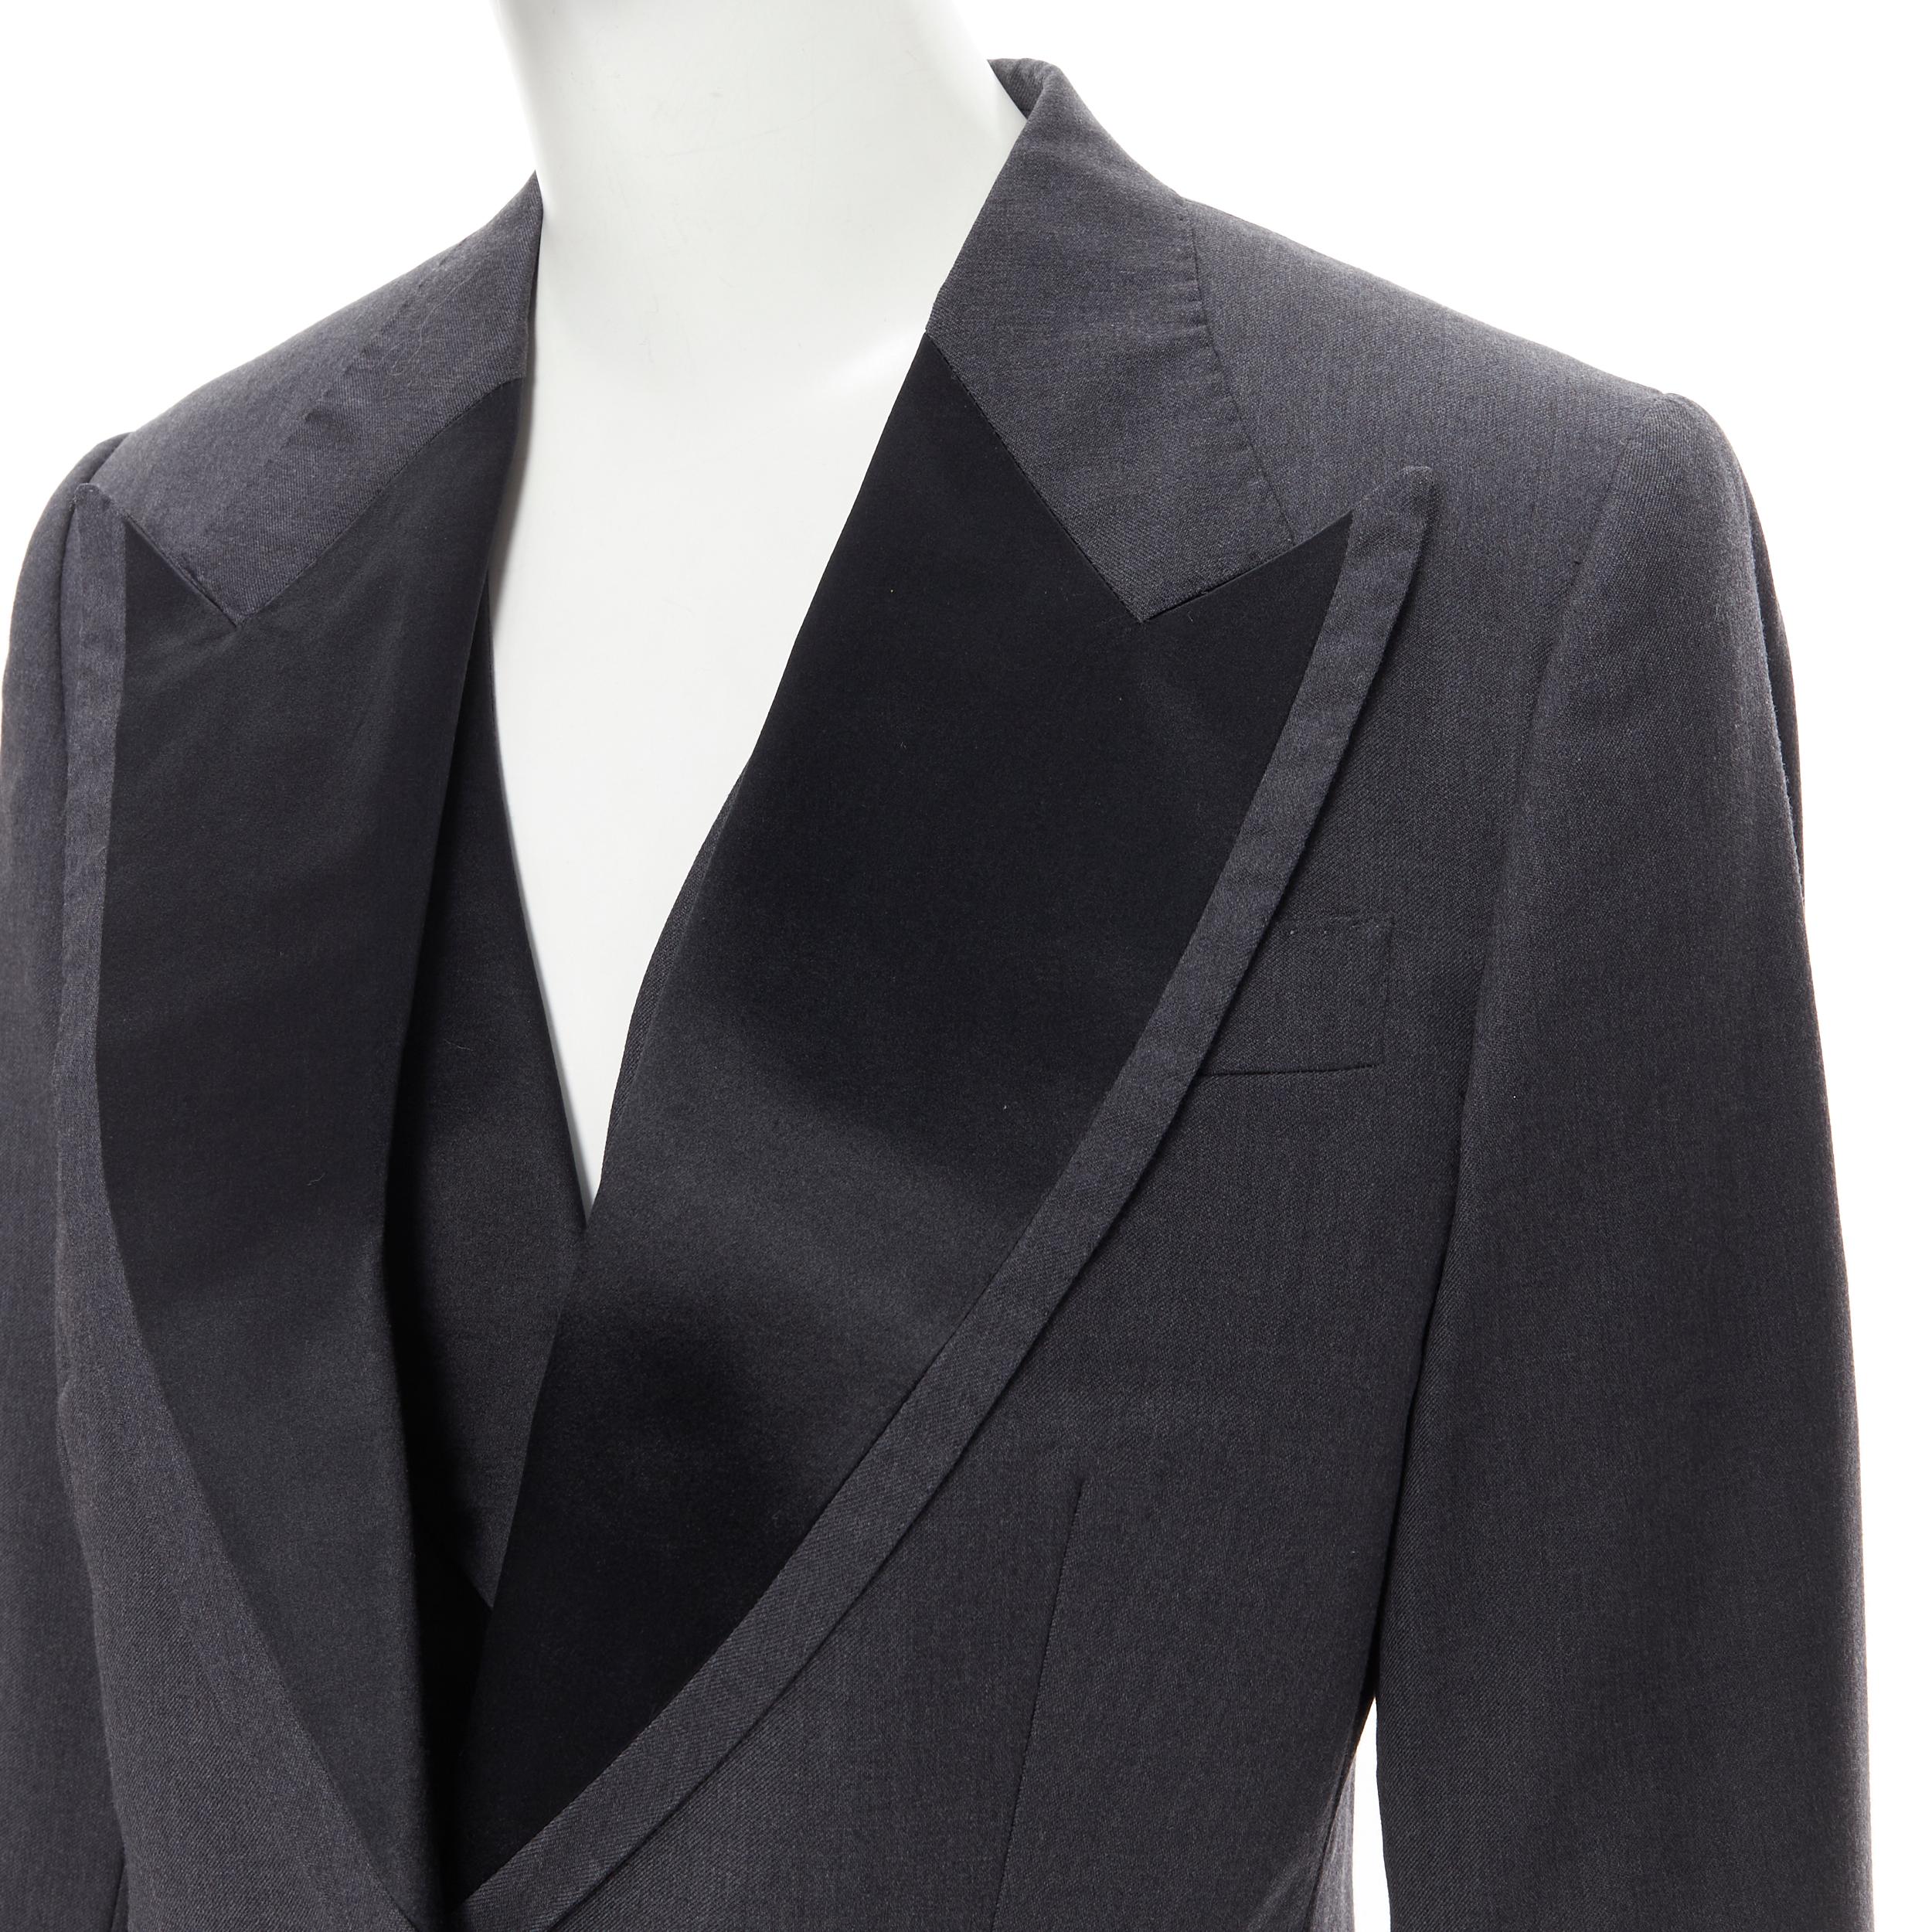 vintage CHLOE grey wool 3-pc tuxedo blazer vest pant suit set 
Reference: GIYG/A00054 
Brand: Chloe 
Designer: Stella McCartney 
Material: Wool 
Color: Grey 
Pattern: Solid 
Closure: Button 
Extra Detail: This blazer comes with the complimentary